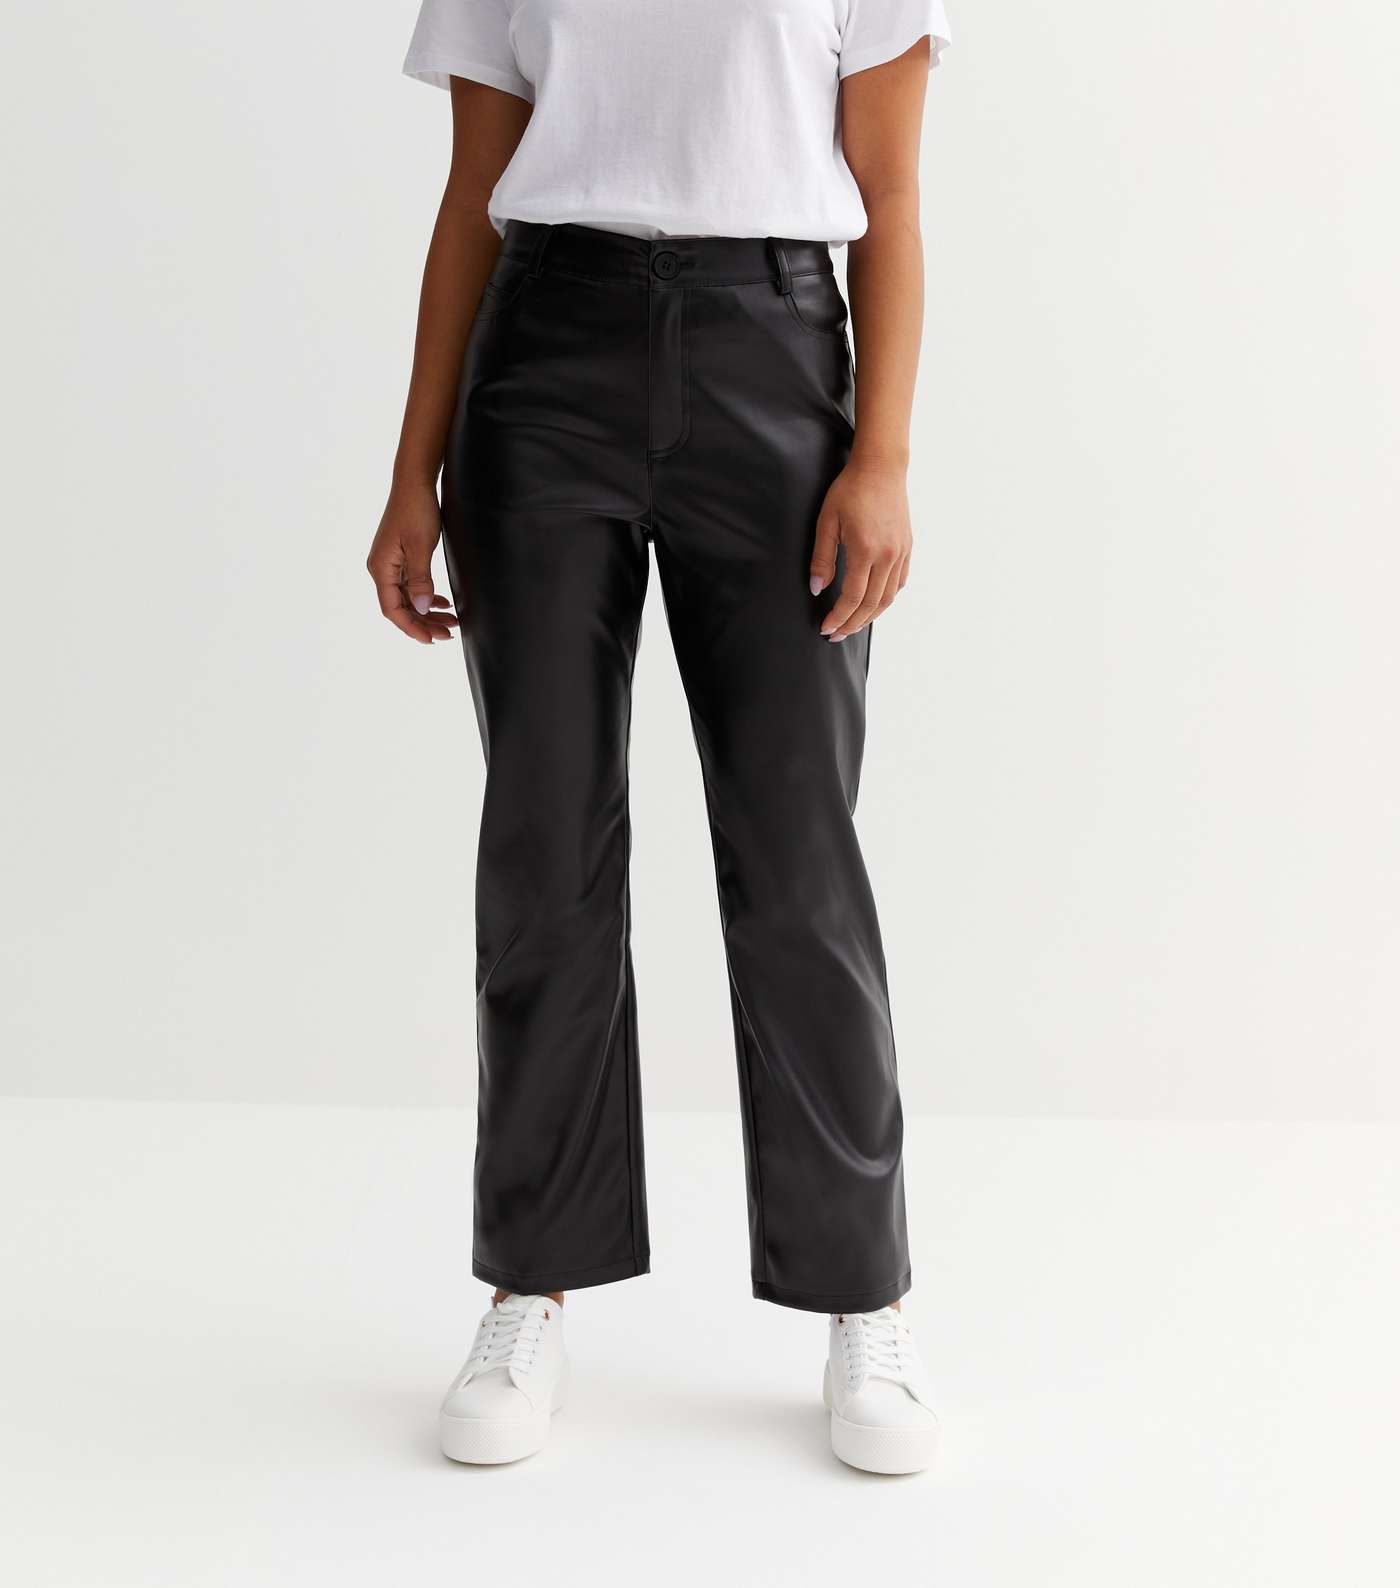 Petite Black Leather-Look High Waist Western Trousers Image 3